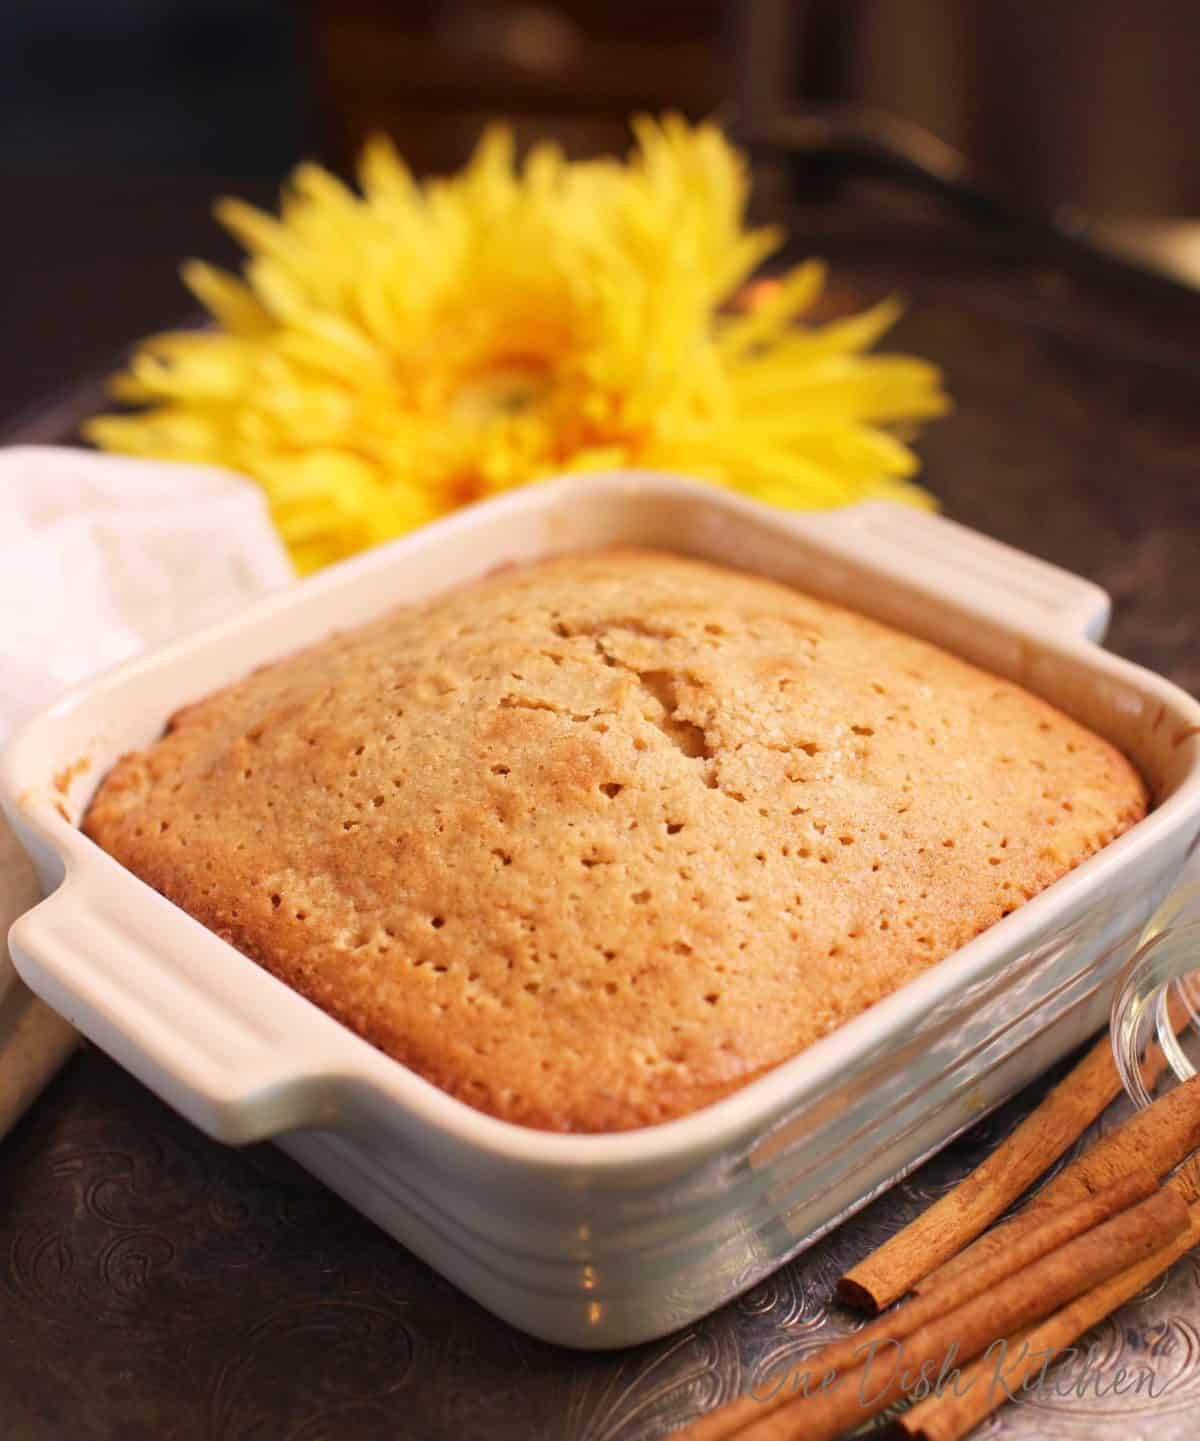 A spice cake in a small square baking dish next to yellow flowers and cinnamon sticks all on a metal tray.